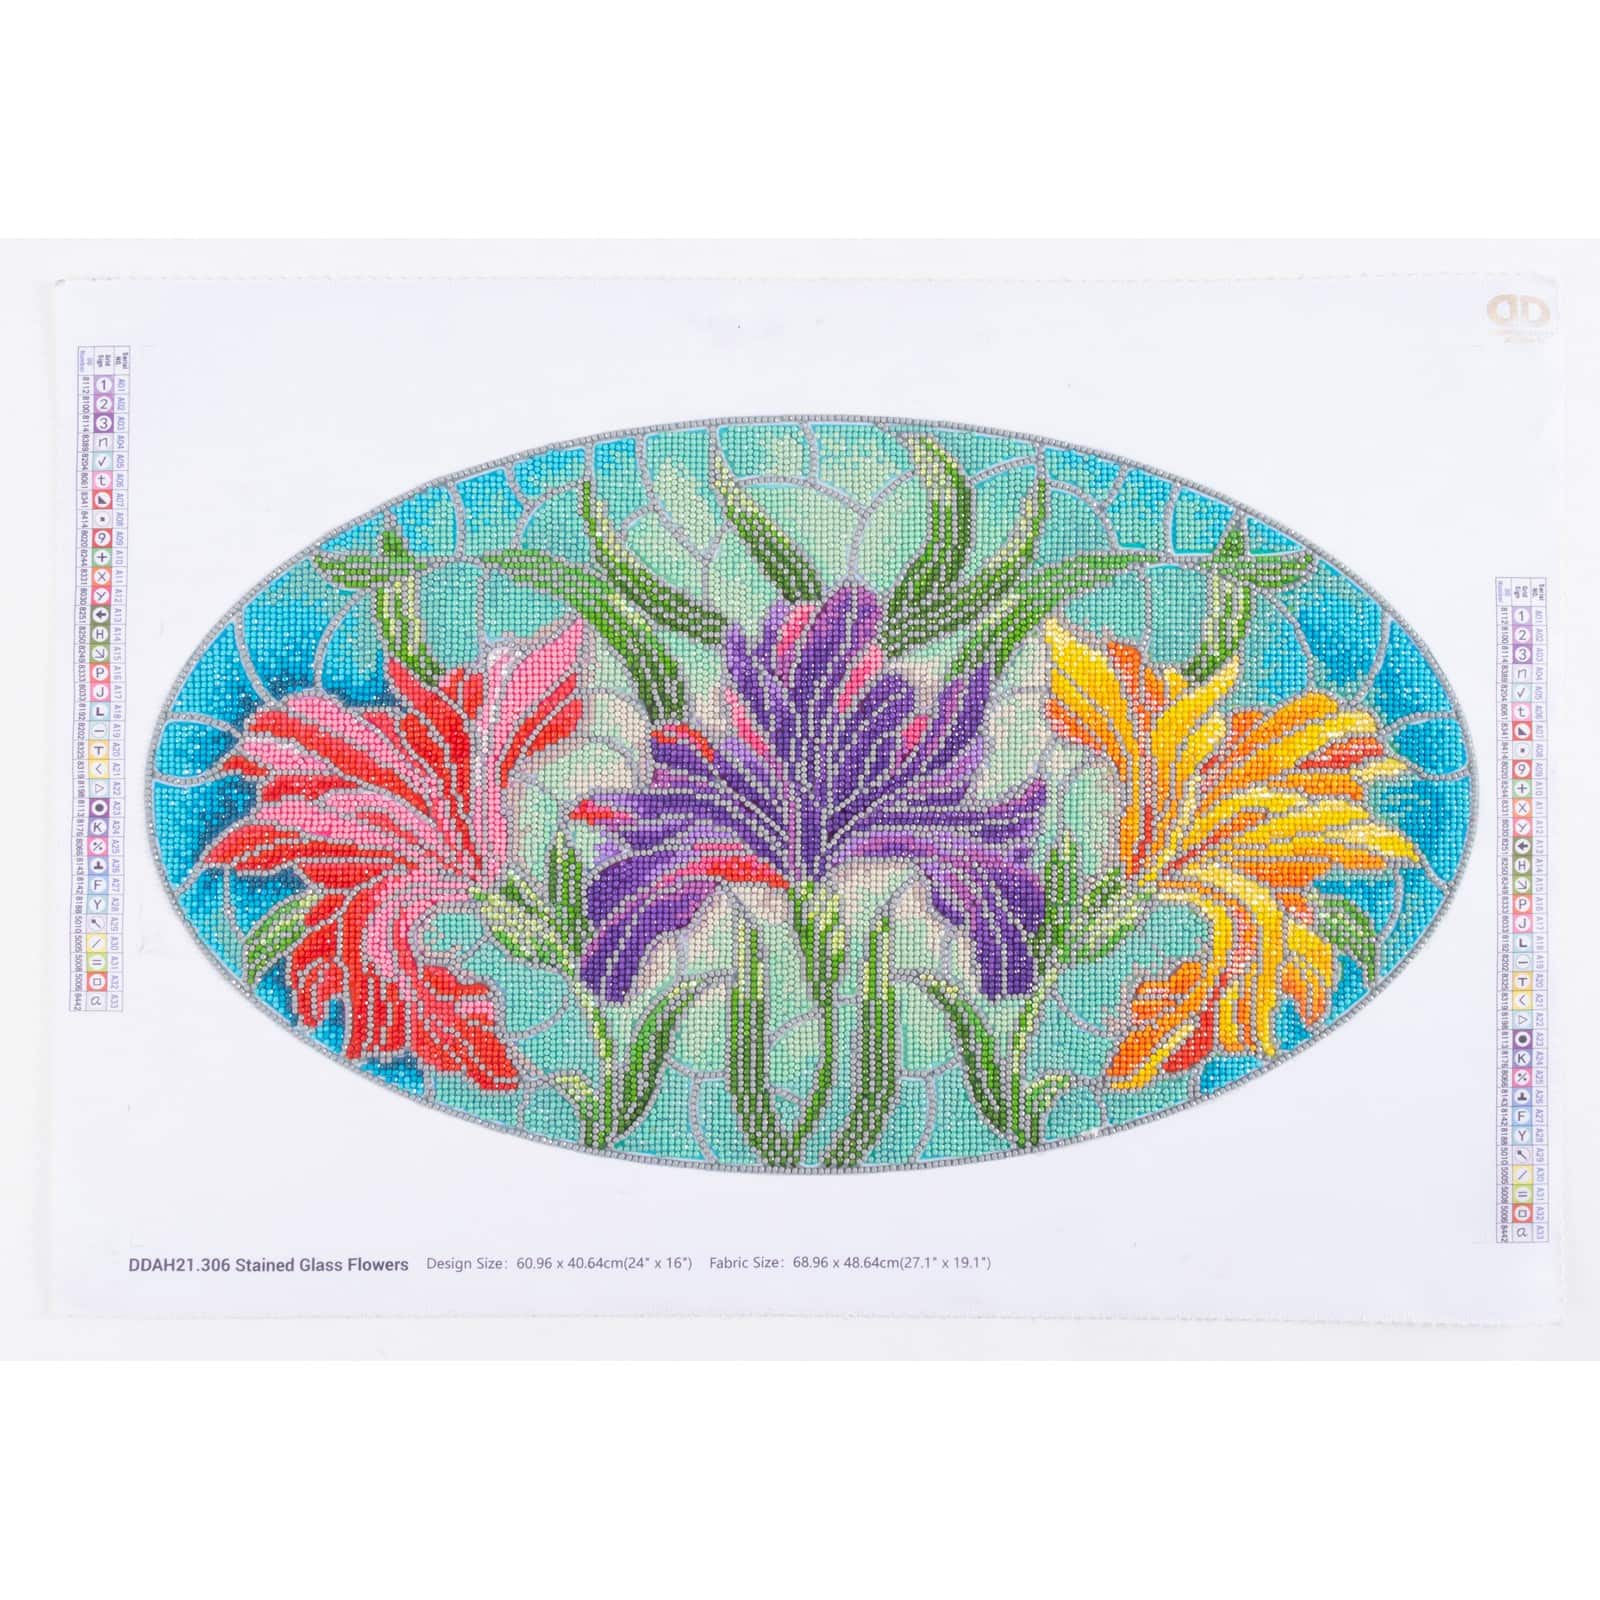 Diamond Dotz® at Home Advanced Stained Glass Flowers Diamond Painting Kit